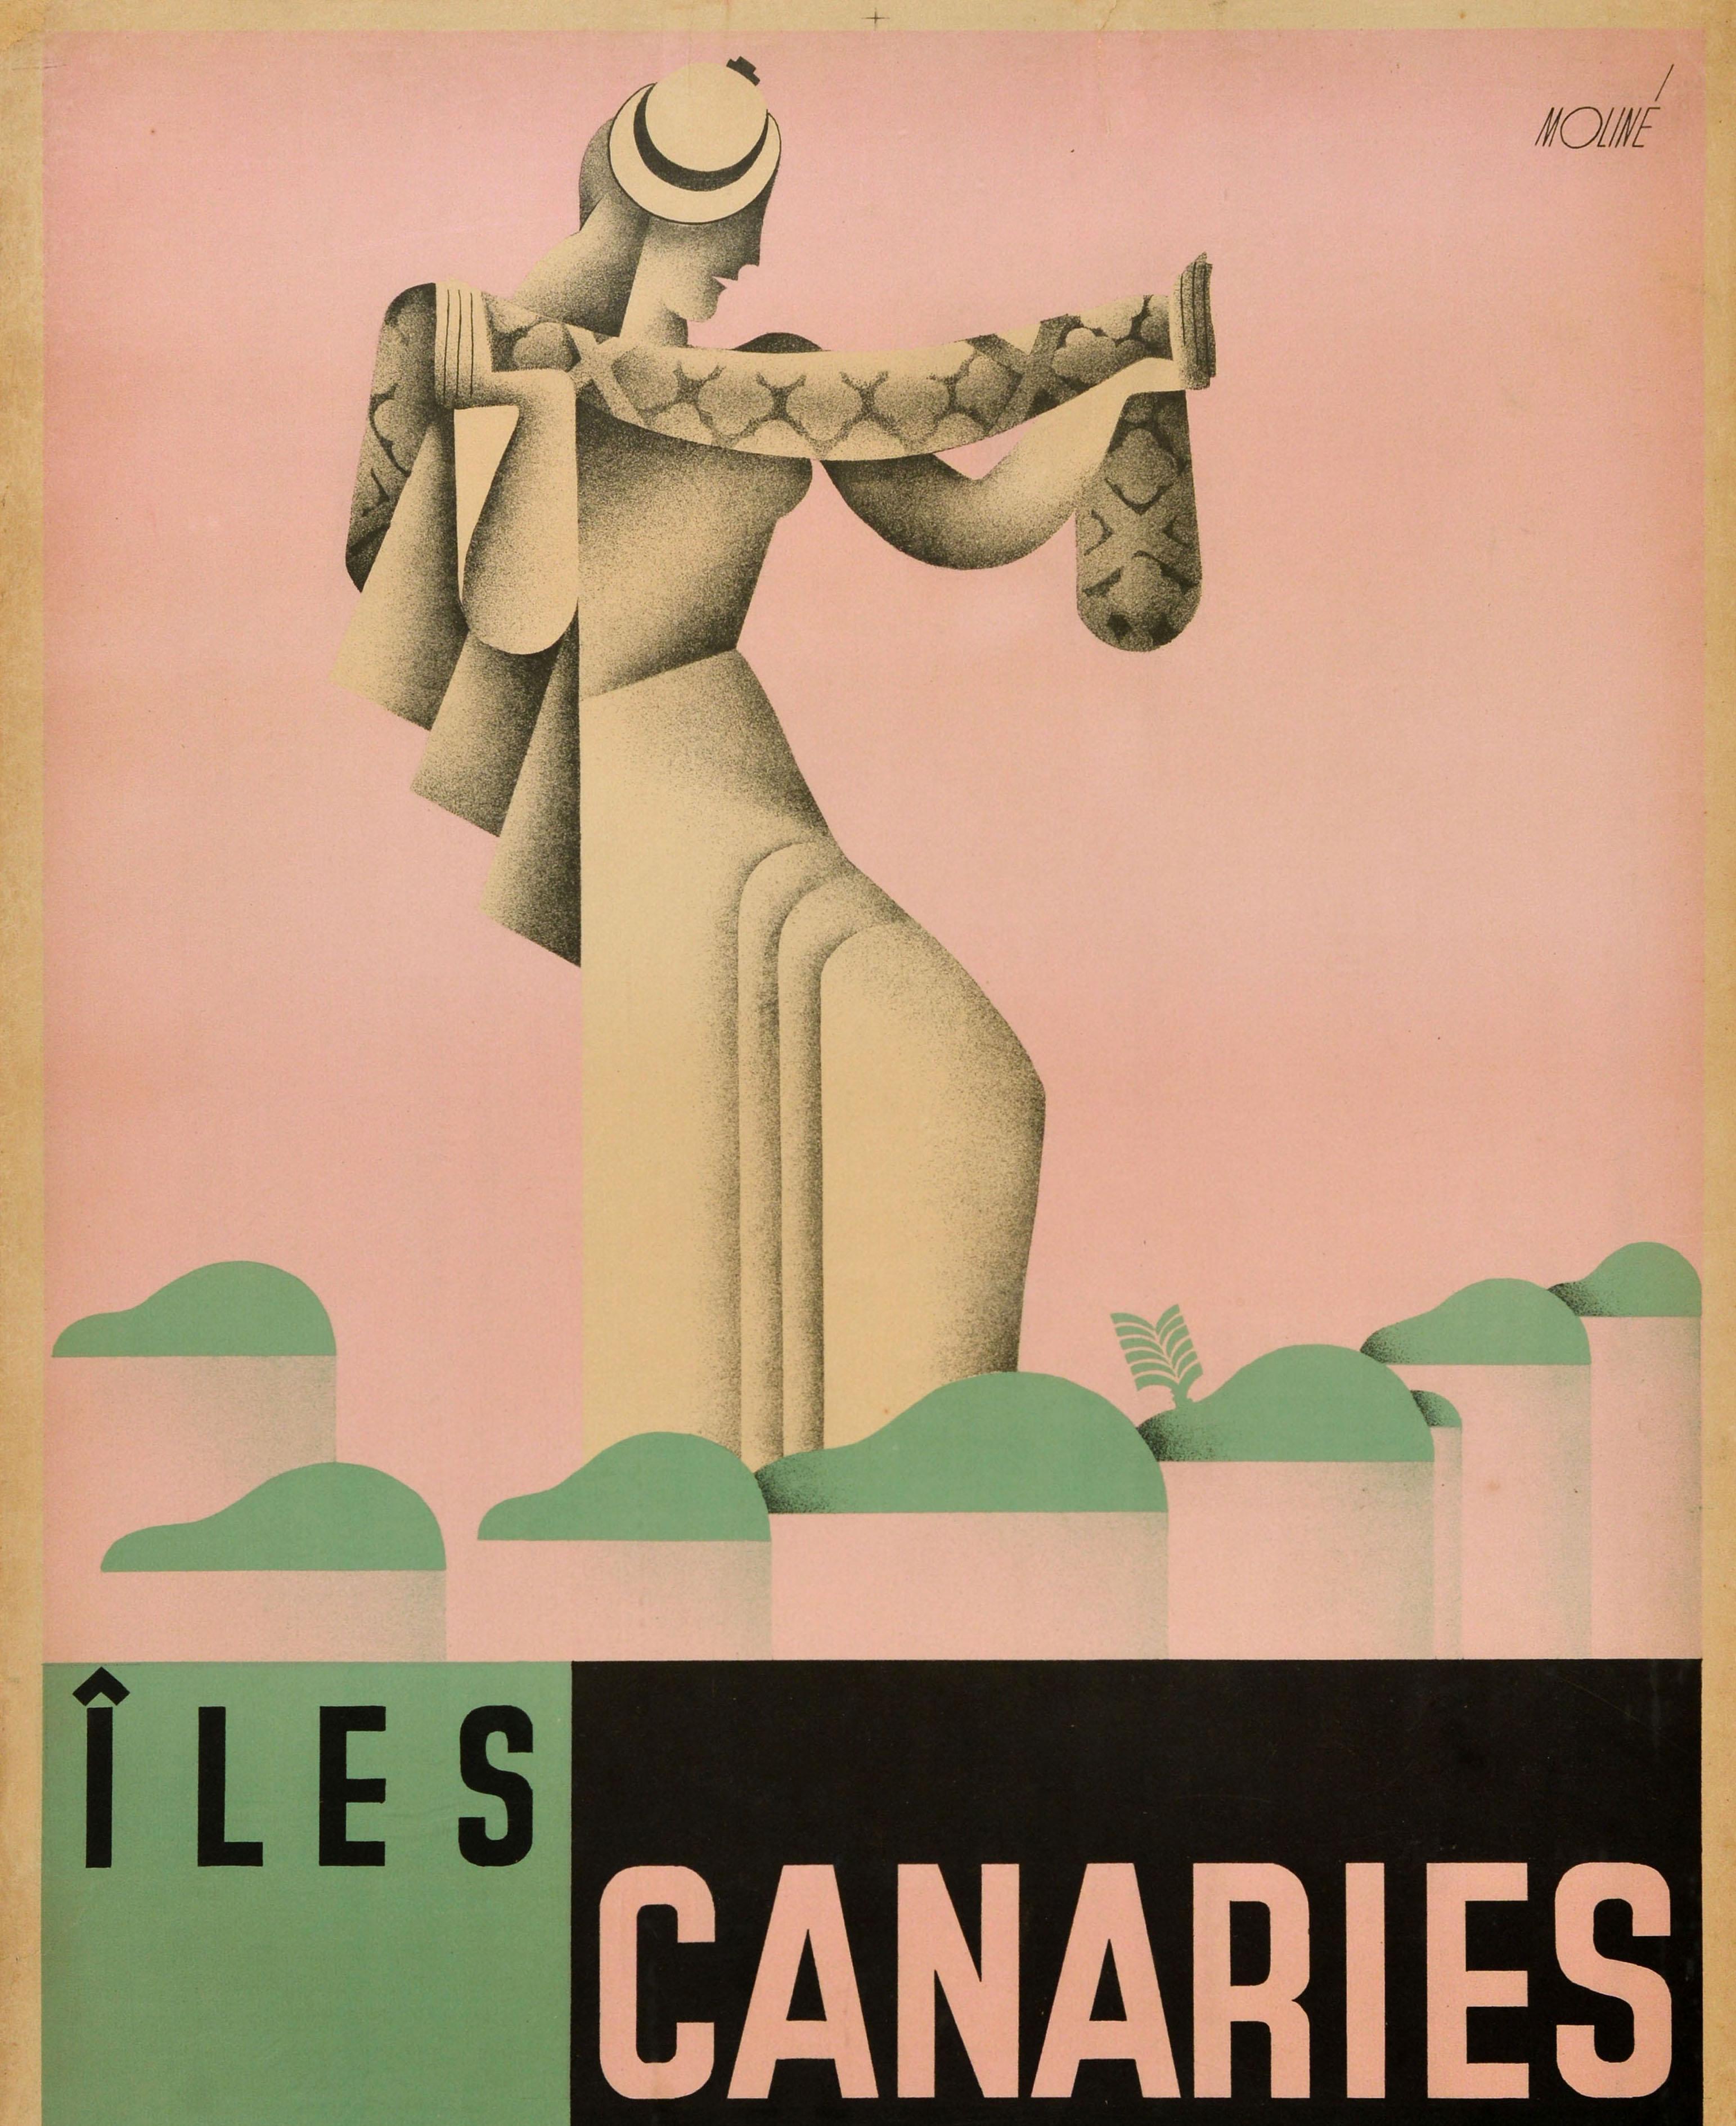 Spanish Original Vintage Travel Poster Canary Islands Iles Canaries Canarias Spain Art For Sale